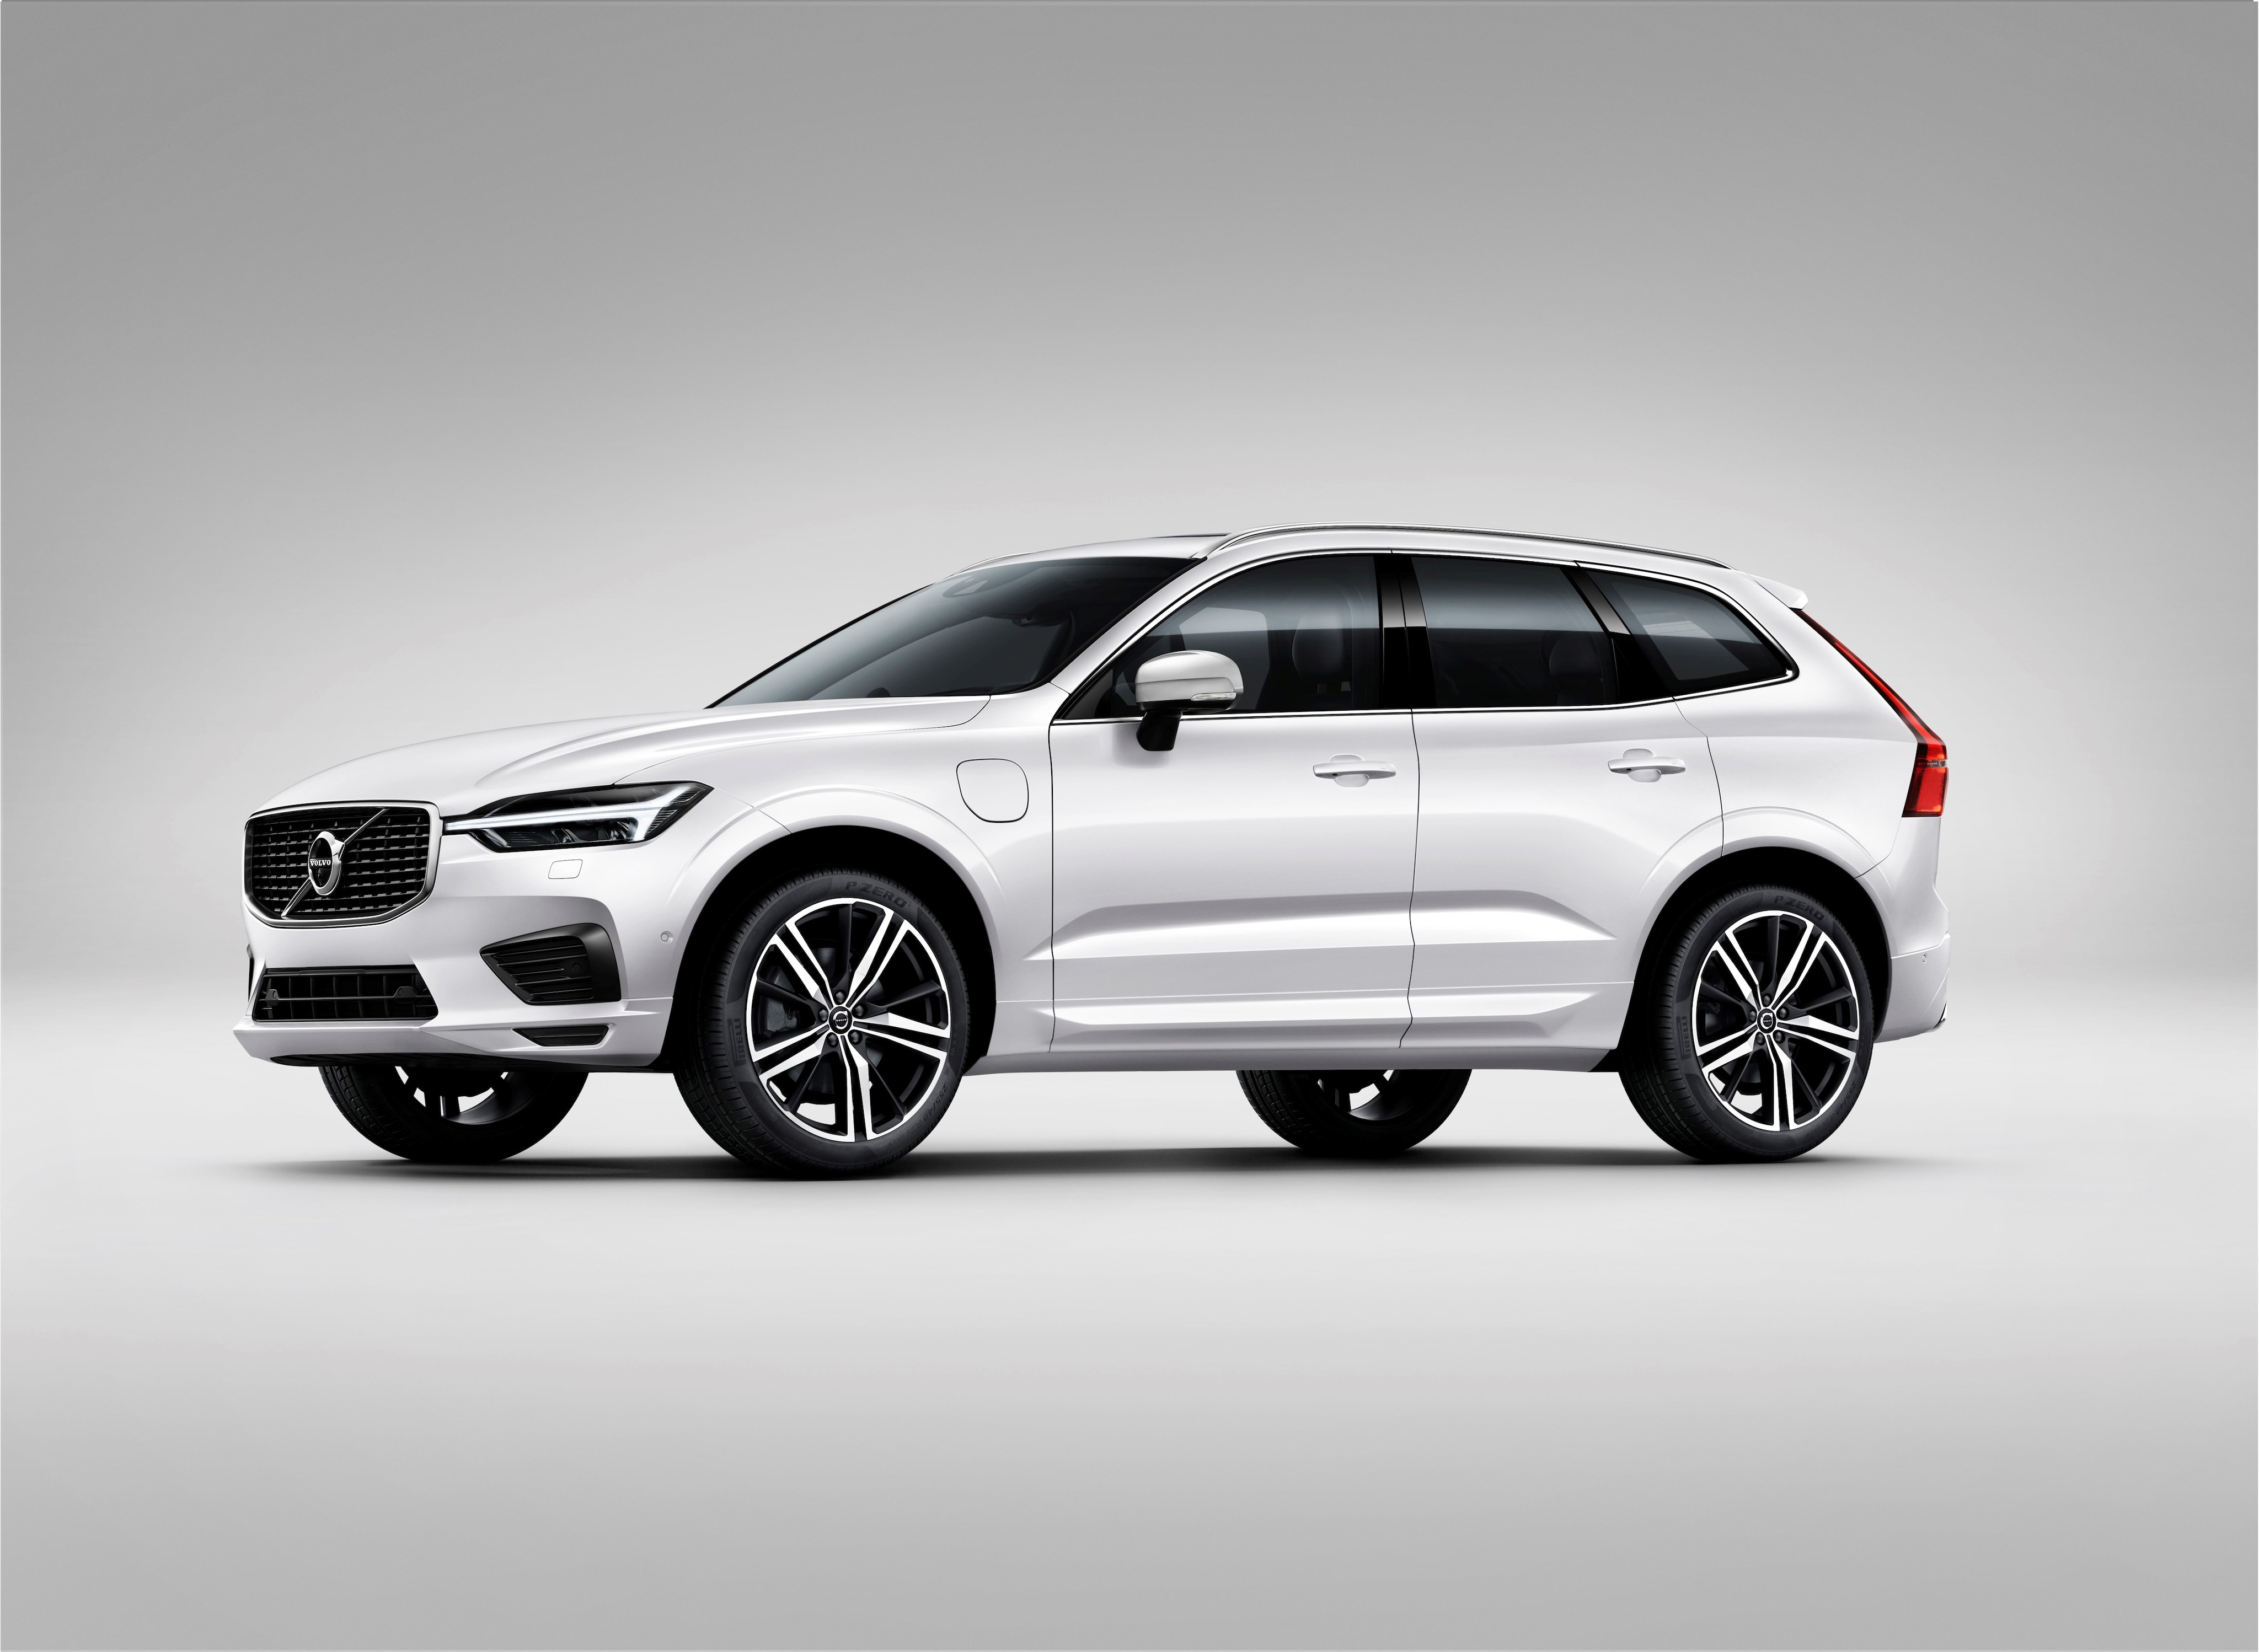 The popular Lease Pull-Ahead program is extended at Culver City Volvo Cars